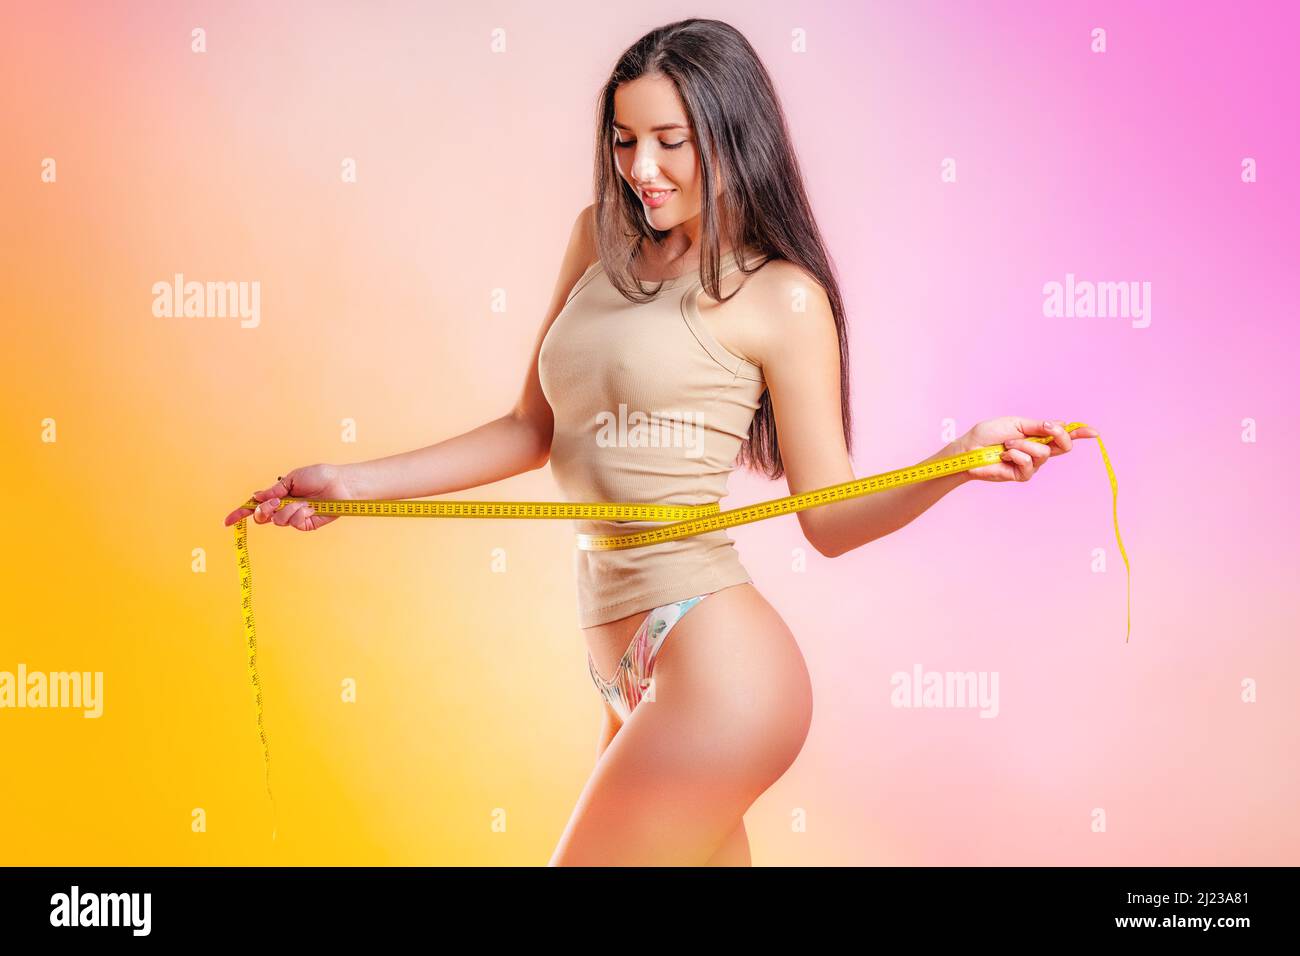 young beauty with a measurement tape Stock Photo